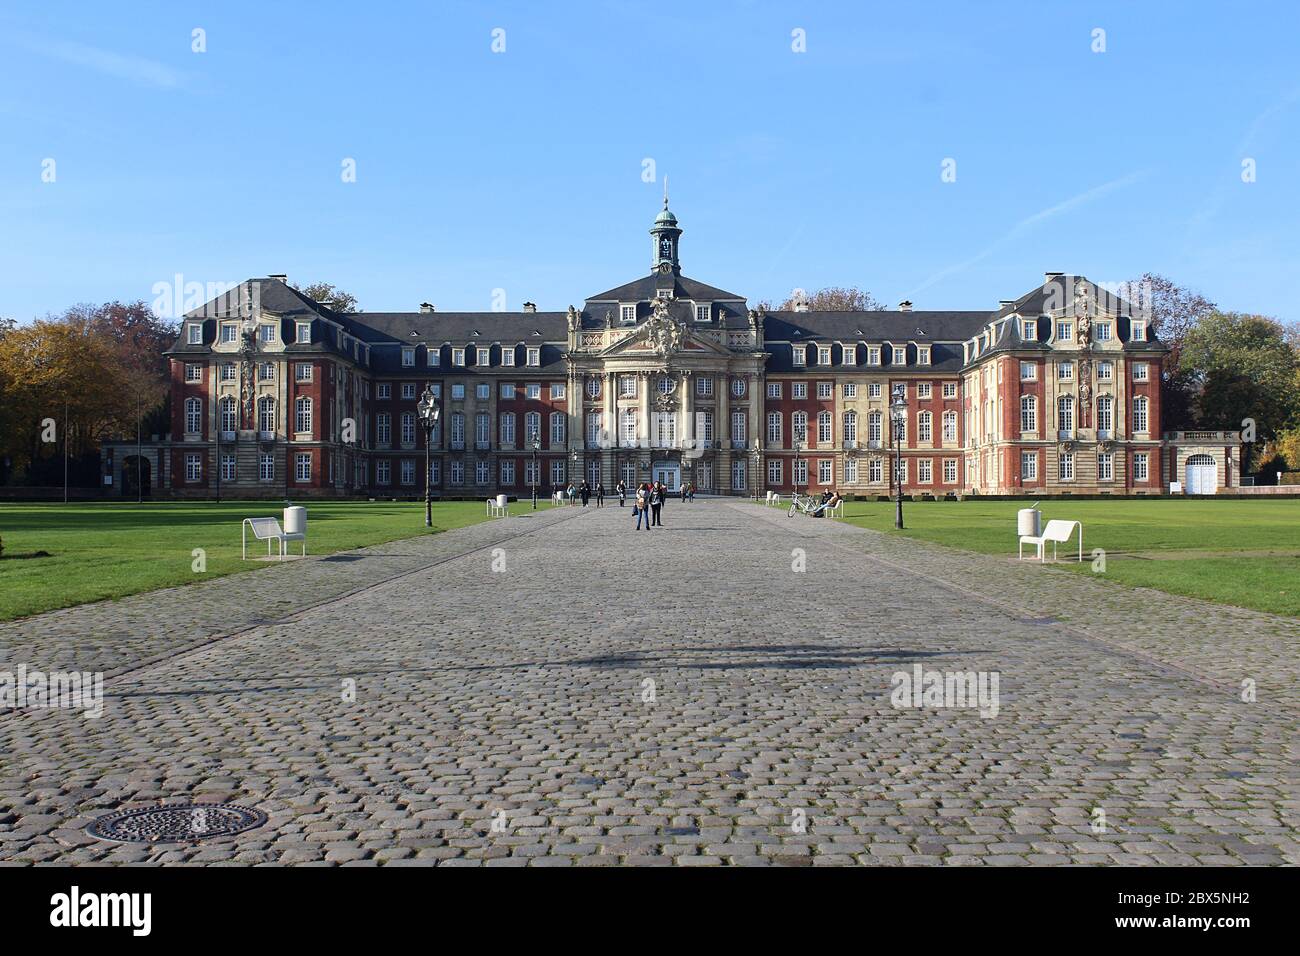 Facade of Muenster Schloss, part of the University of Muenster, with people taking photos. Stock Photo